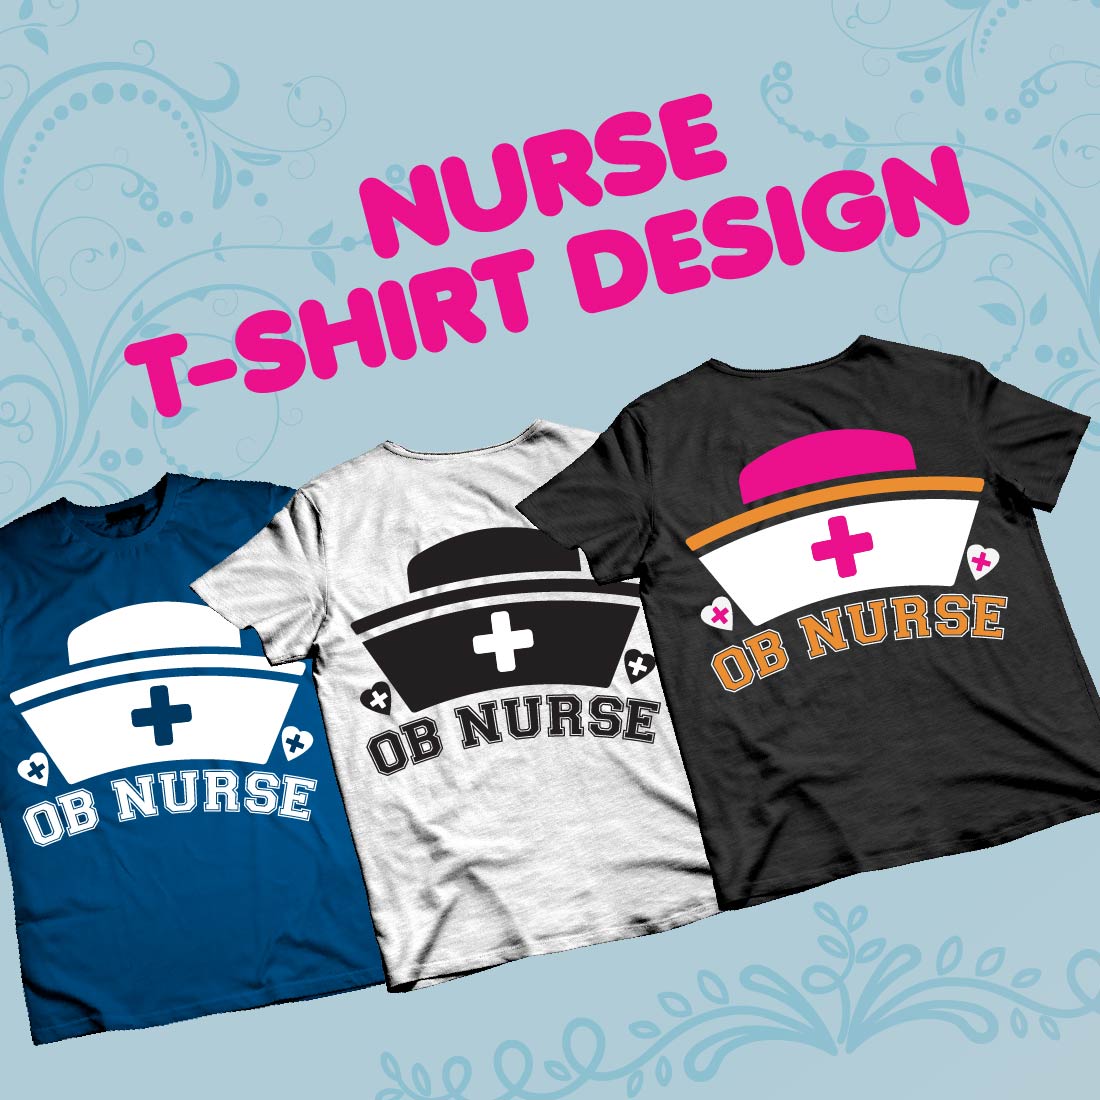 Set of images of t-shirts with a colorful print about nurses.